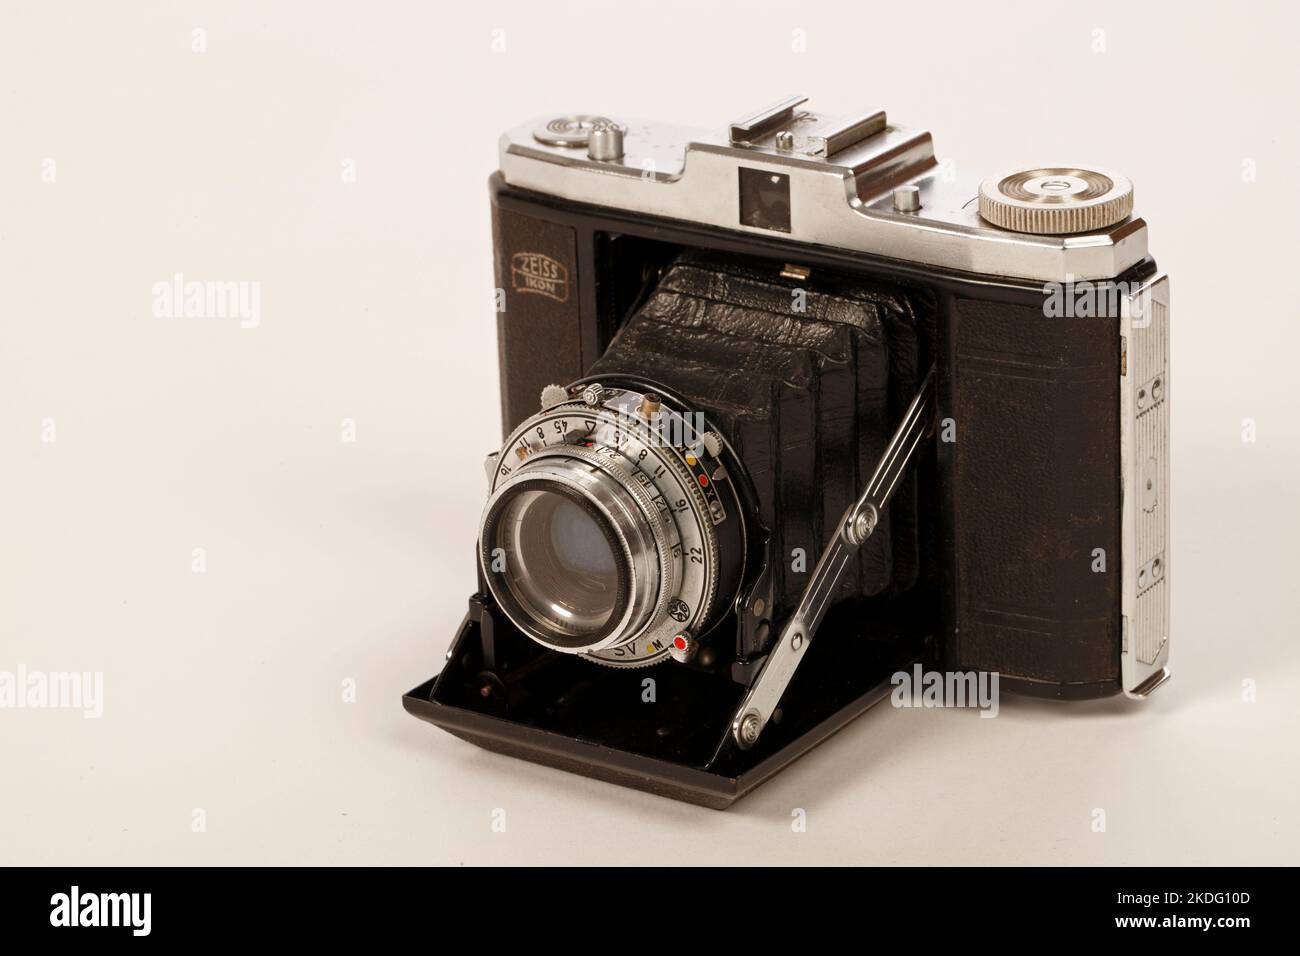 Prontor-SV compact bellows folding camera with a Zeiss Ikon Lens. Newspaper reporting Stock Photo